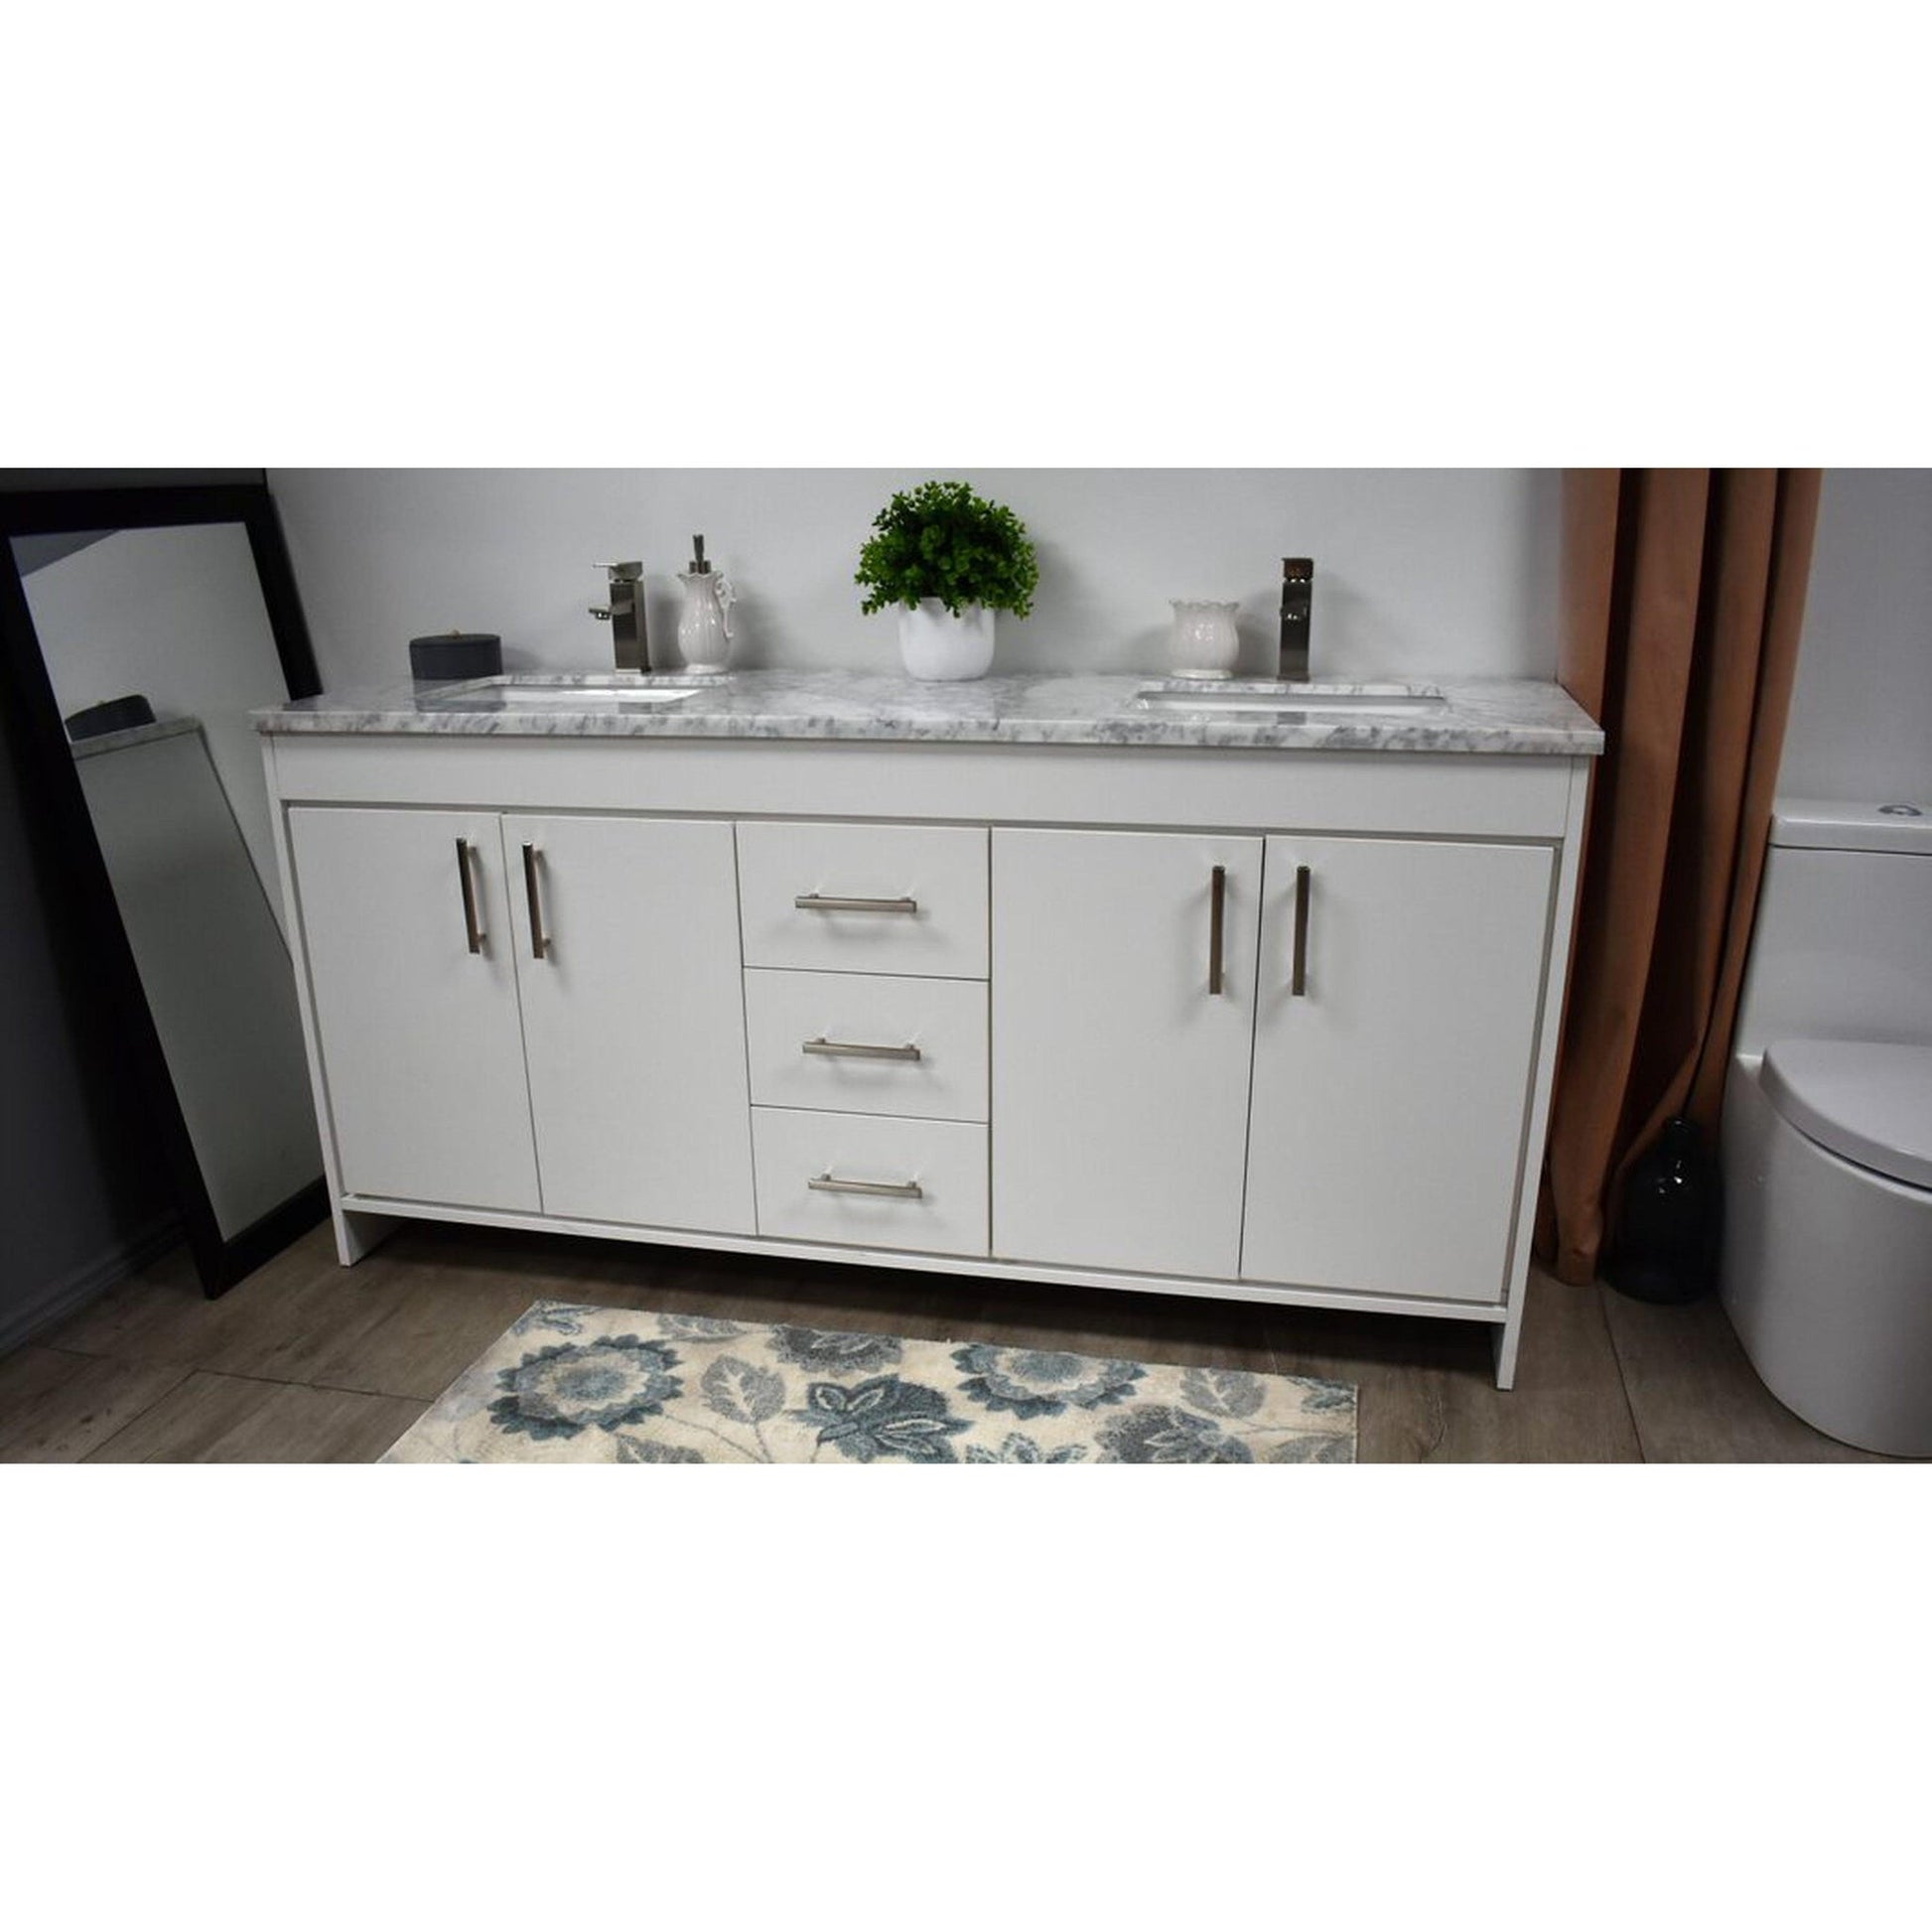 Volpa USA Capri 72" x 22" White Freestanding Modern Bathroom Vanity With Undermount Double Sink And Carrara Marble Top With Brushed Nickel Edge Handles